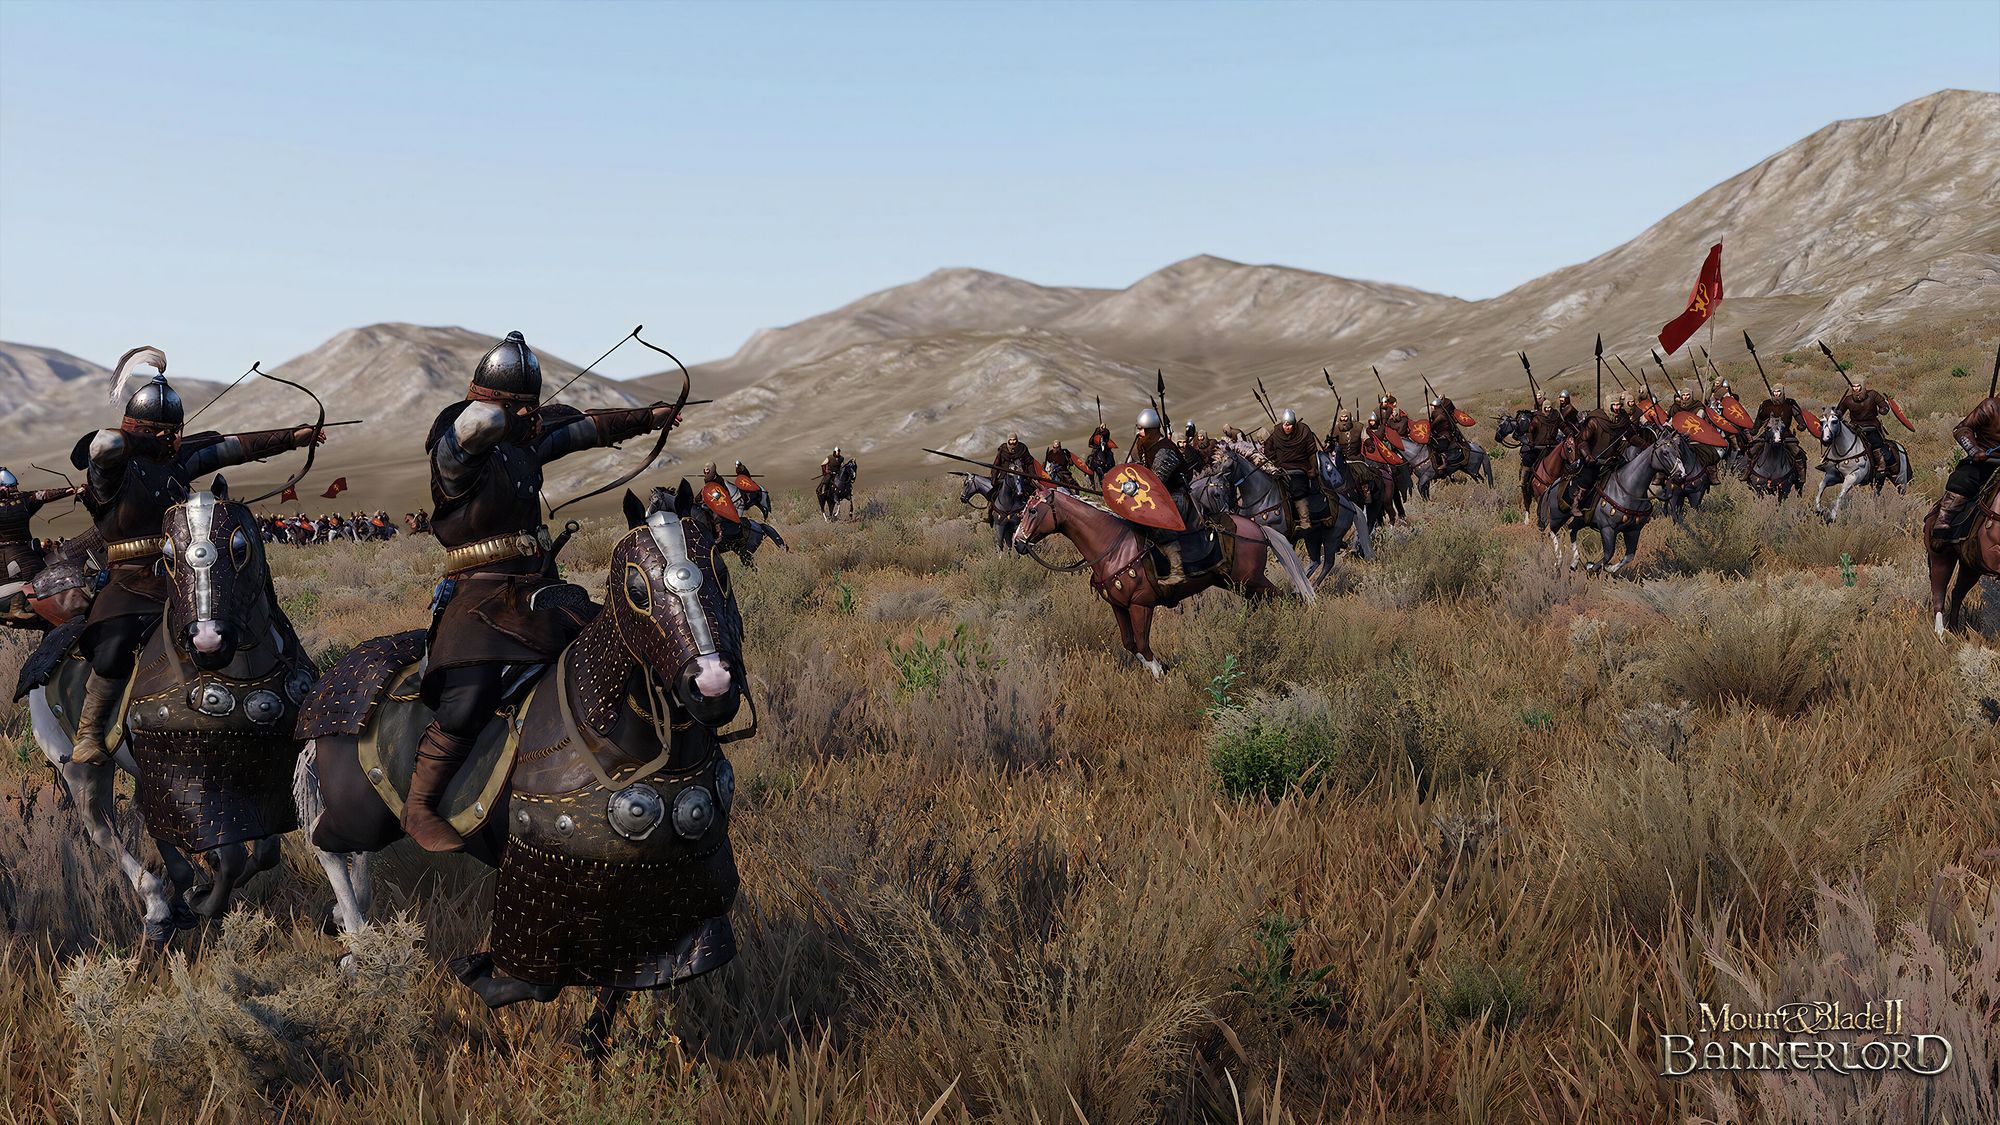 Mount and Blade Bannerlord 2 Multiplayer